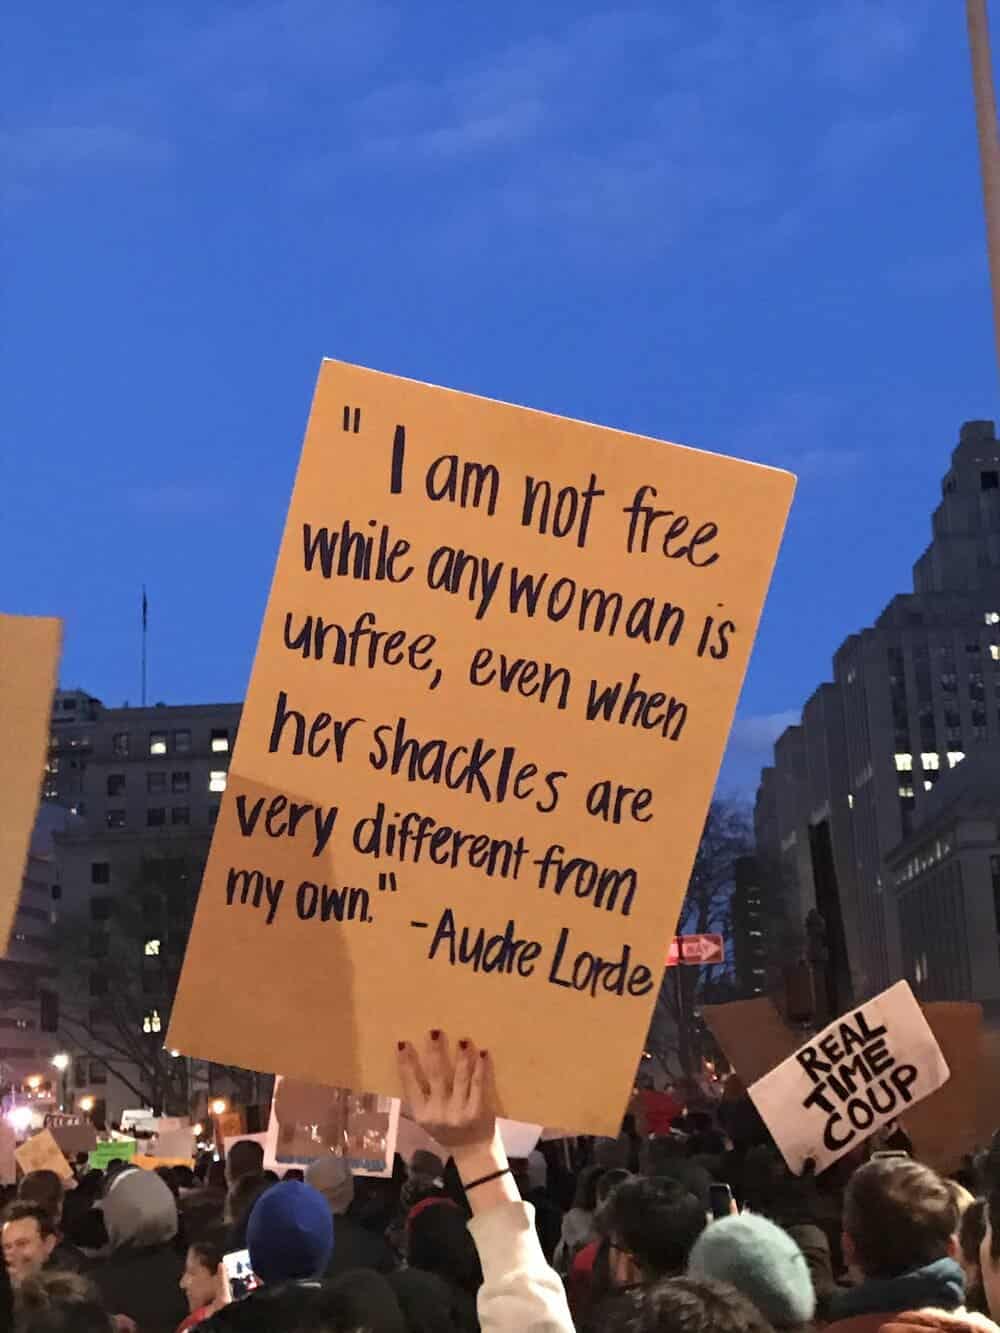 image of women's rights protester with sign that says I am not free while any woman is unfree, even when her shackles are very different from my own - Audra Lorde